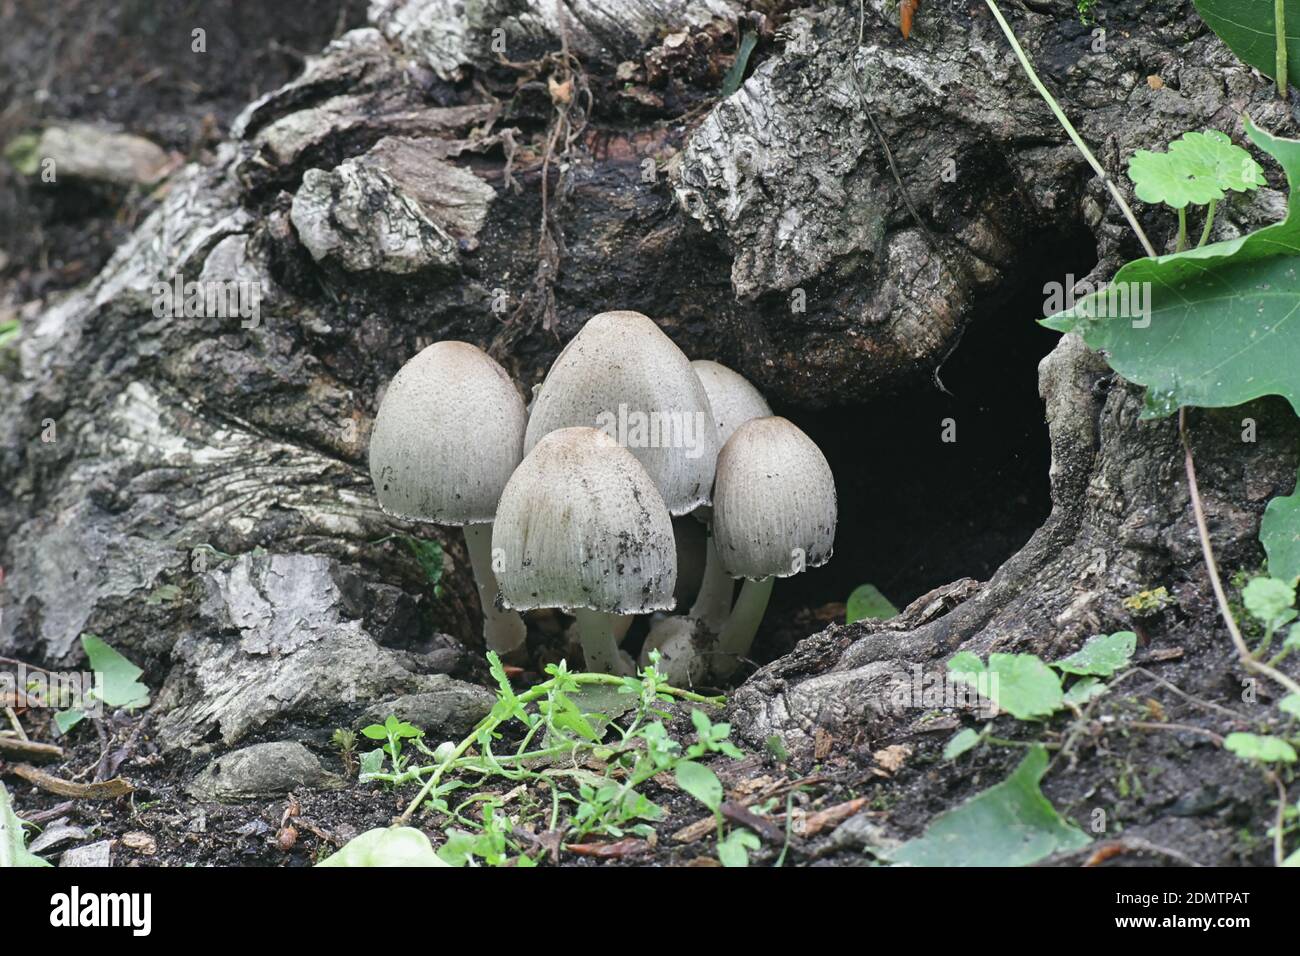 Common ink cap, Coprinopsis atramentaria, also known as common inky cap or tippler's bane, wild mushroom from Finland Stock Photo